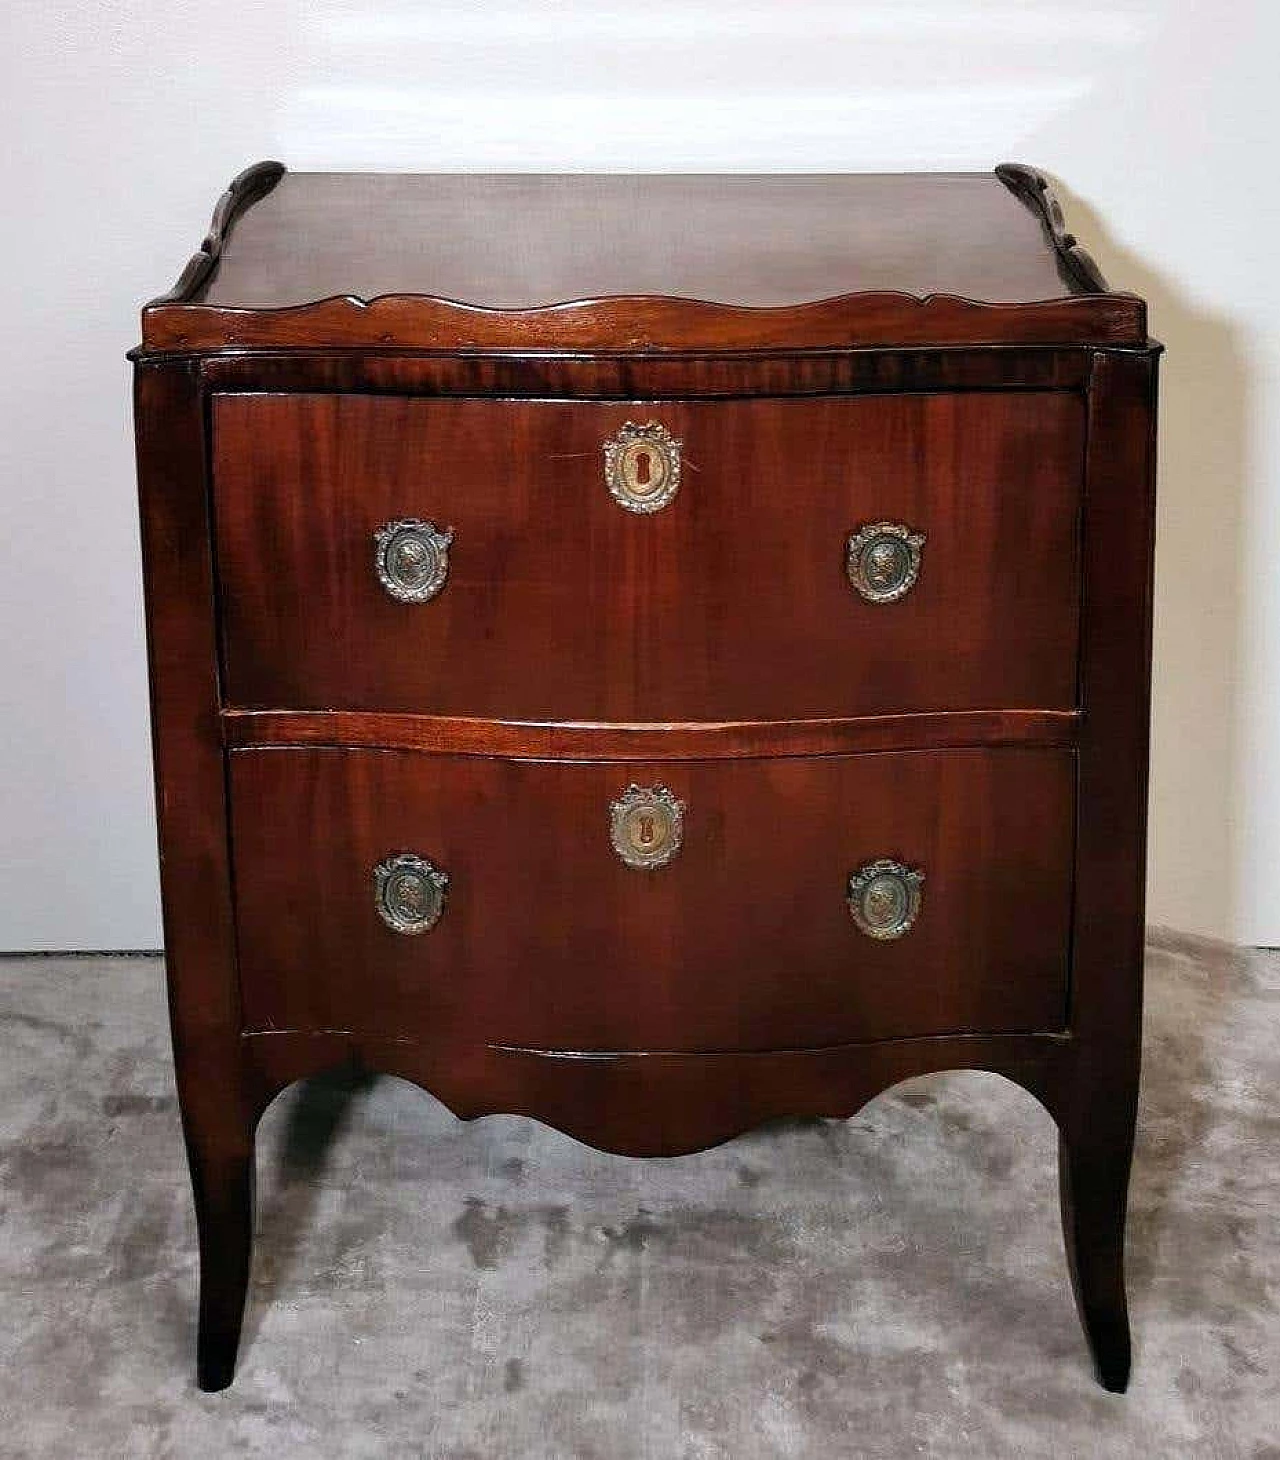 Neoclassical style chest of drawers in mahogany with bronze decorations, 18th century 1332965